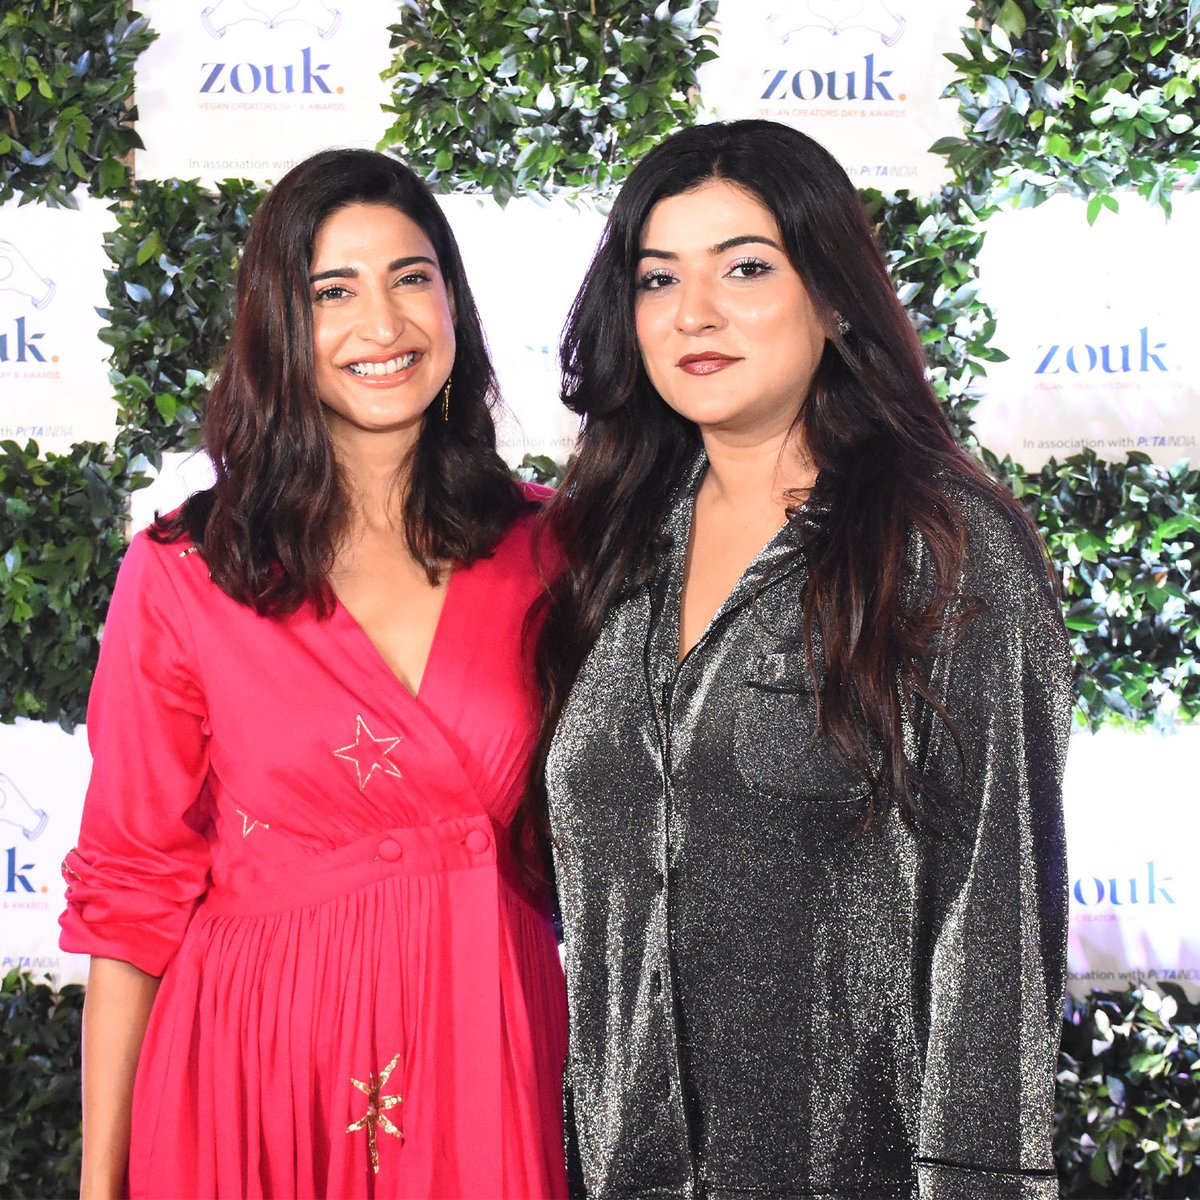 Thrilled to have the illustrious @AahanaKumra , the celebrated actress, grace our event with her presence! Her support at the Zouk Vegan Creators Day & Awards 2023 added an extra sparkle to our celebration of veganism, creativity, and community. #Zouk #AahanaKumra